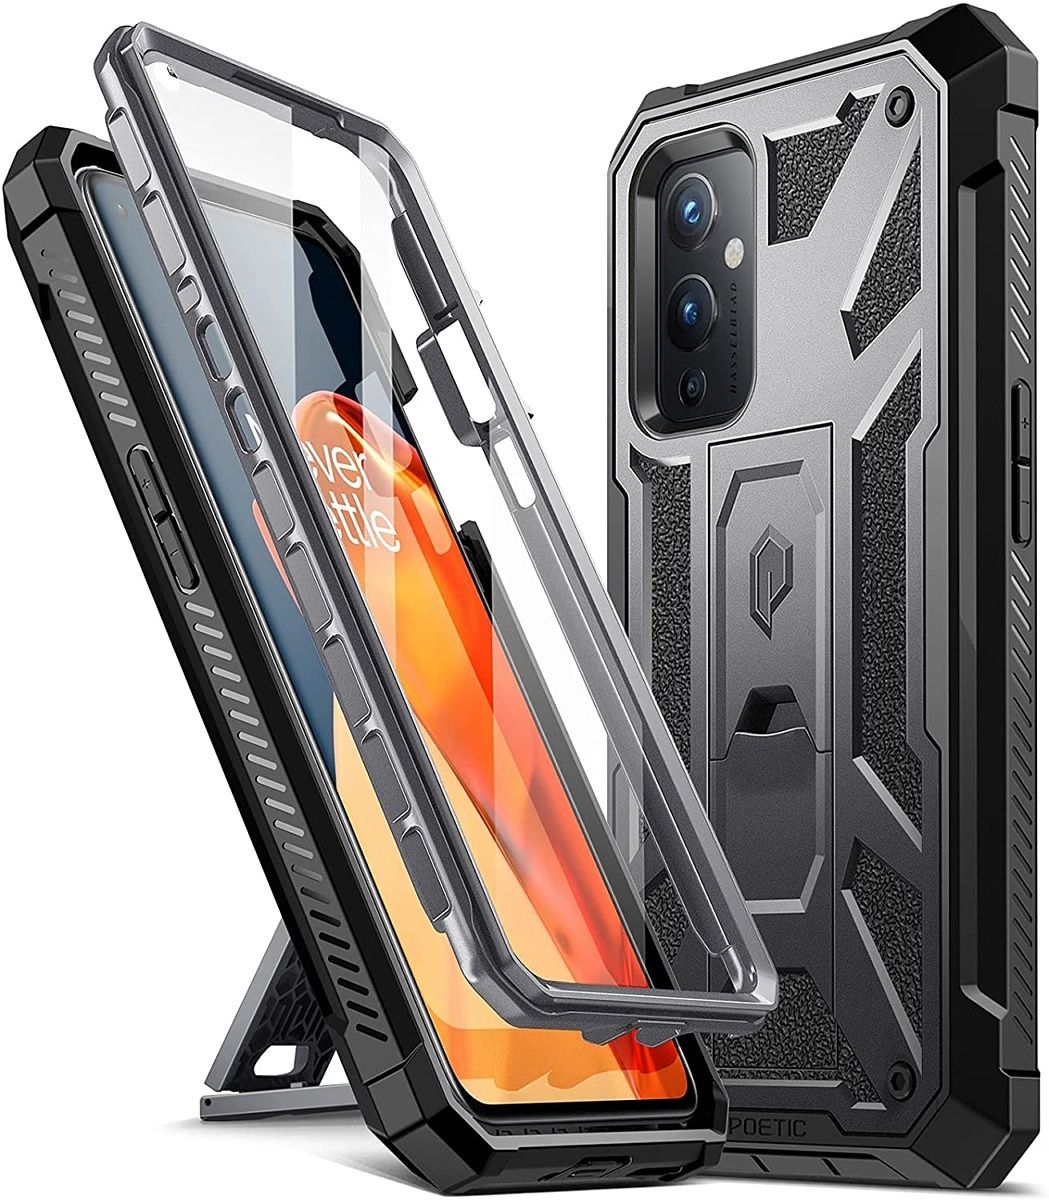 Poetic’s Spartan Series case uses a hard frame bumper, impact-absorbing TPU, and a front PC frame with a built-in screen protector to give you all-around full-body protection. It also comes with a retractable kickstand for hands-free video calls and binge-watching.